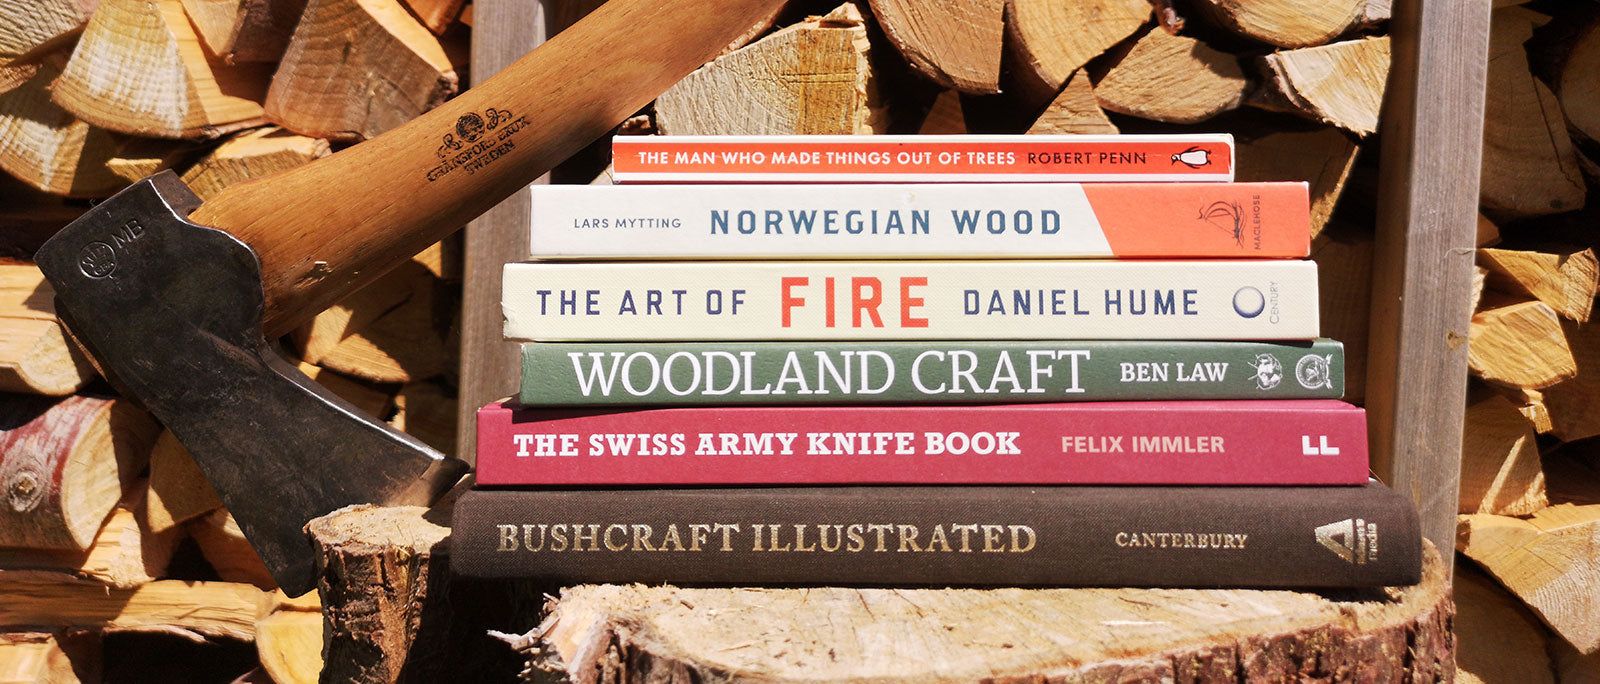 Bushcraft Bibles: 6 Best Books for Backwoods Folk | Culture & Pioneers | Wildbounds